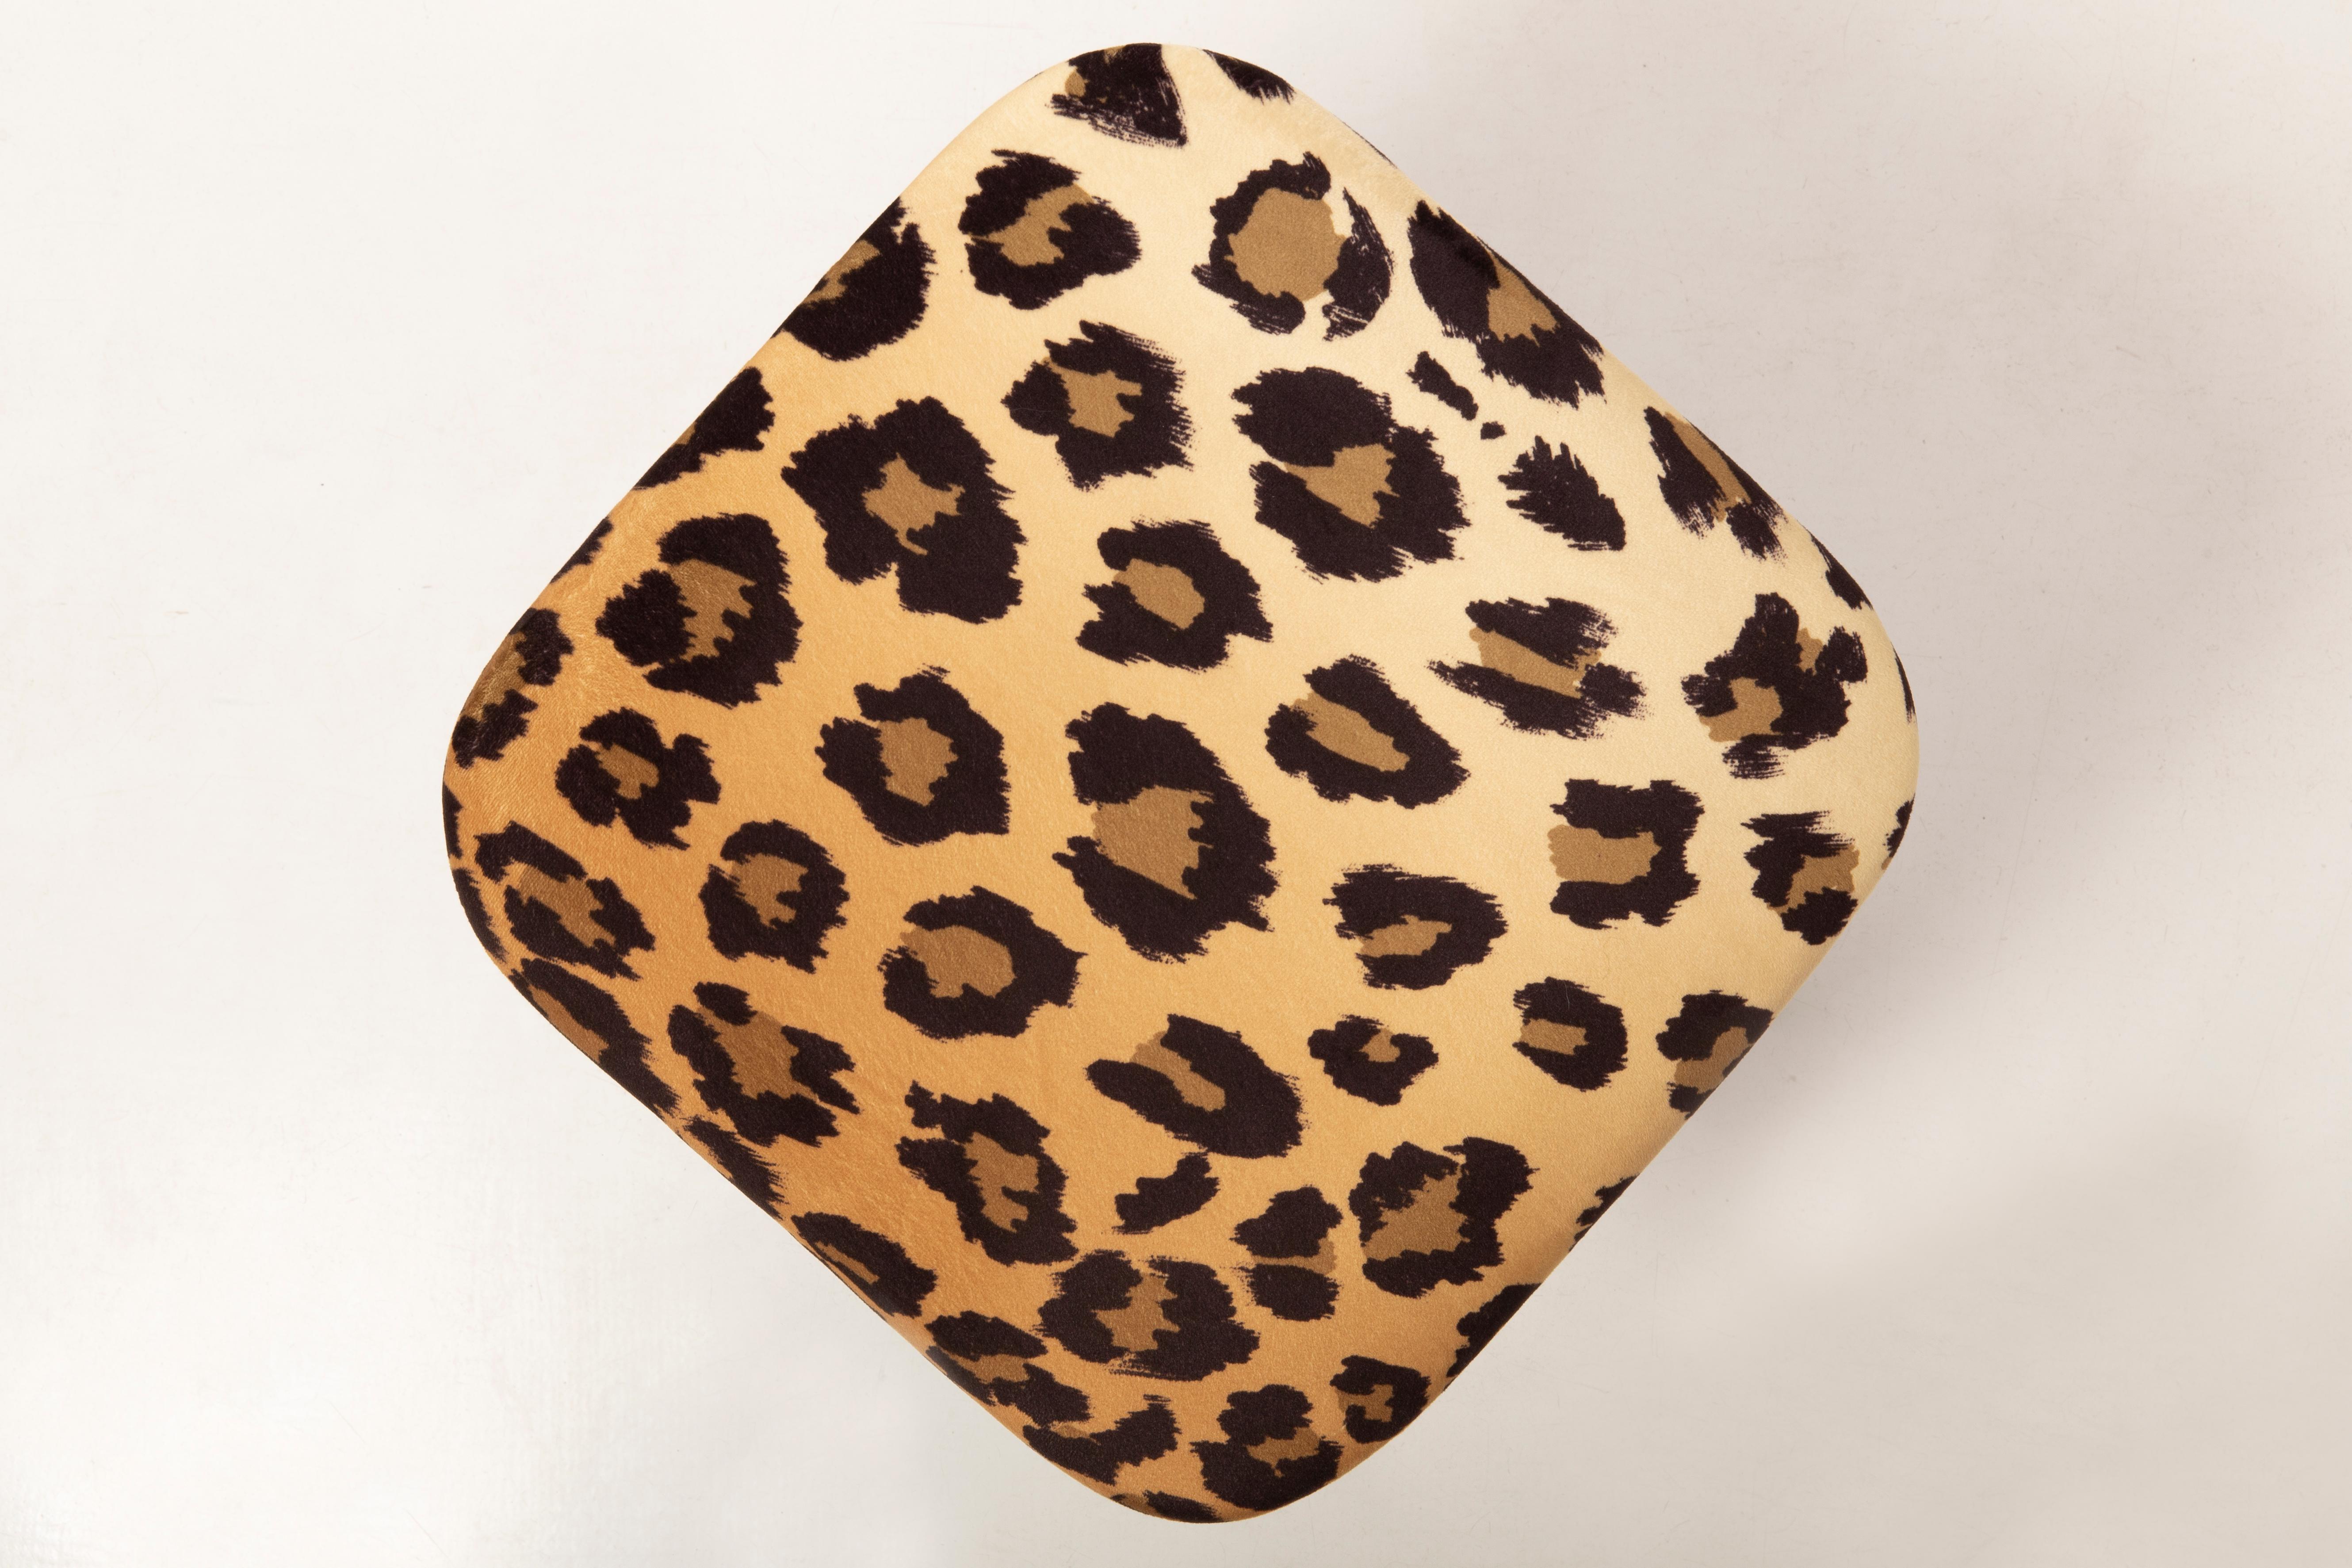 Stool from the turn of the 1960s and 1970s. Beautiful soft velvet leopard print upholstery. The stool consists of an upholstered part, a seat and wooden legs narrowing downwards, characteristic of the 1960s style. We an prepare this stool also in